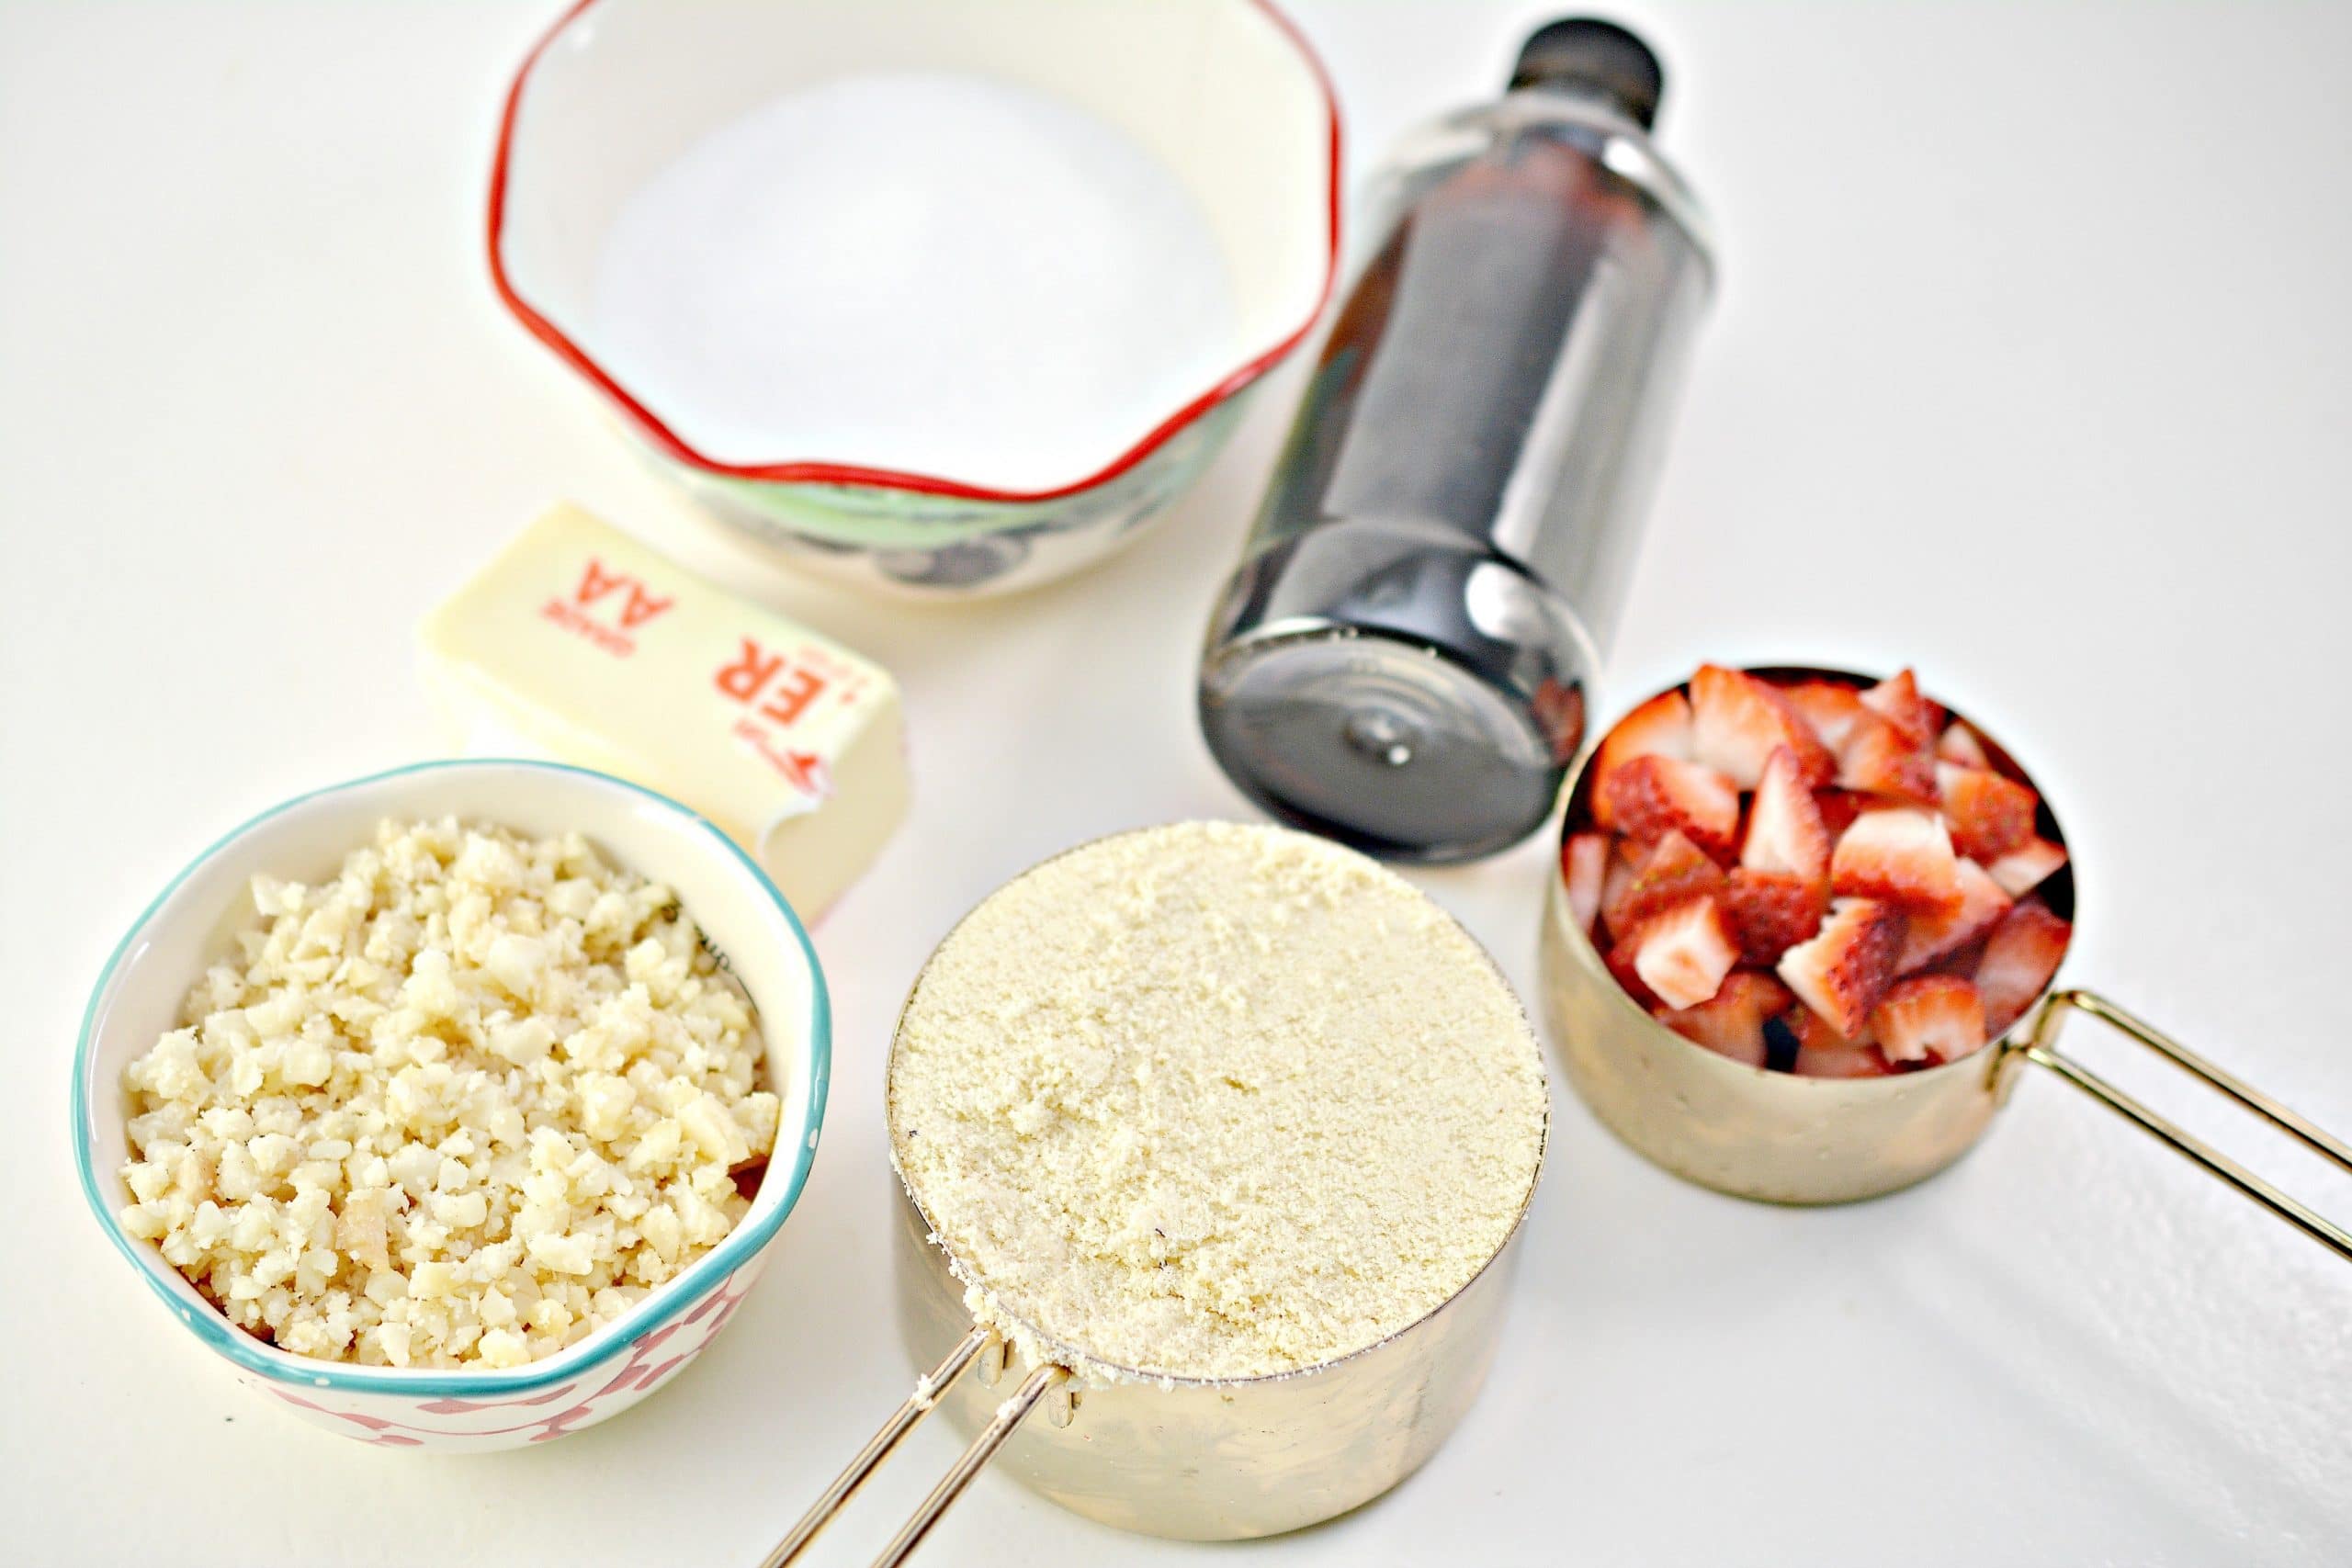 Ingredients for Keto Strawberry Macadamia Nut Cookies